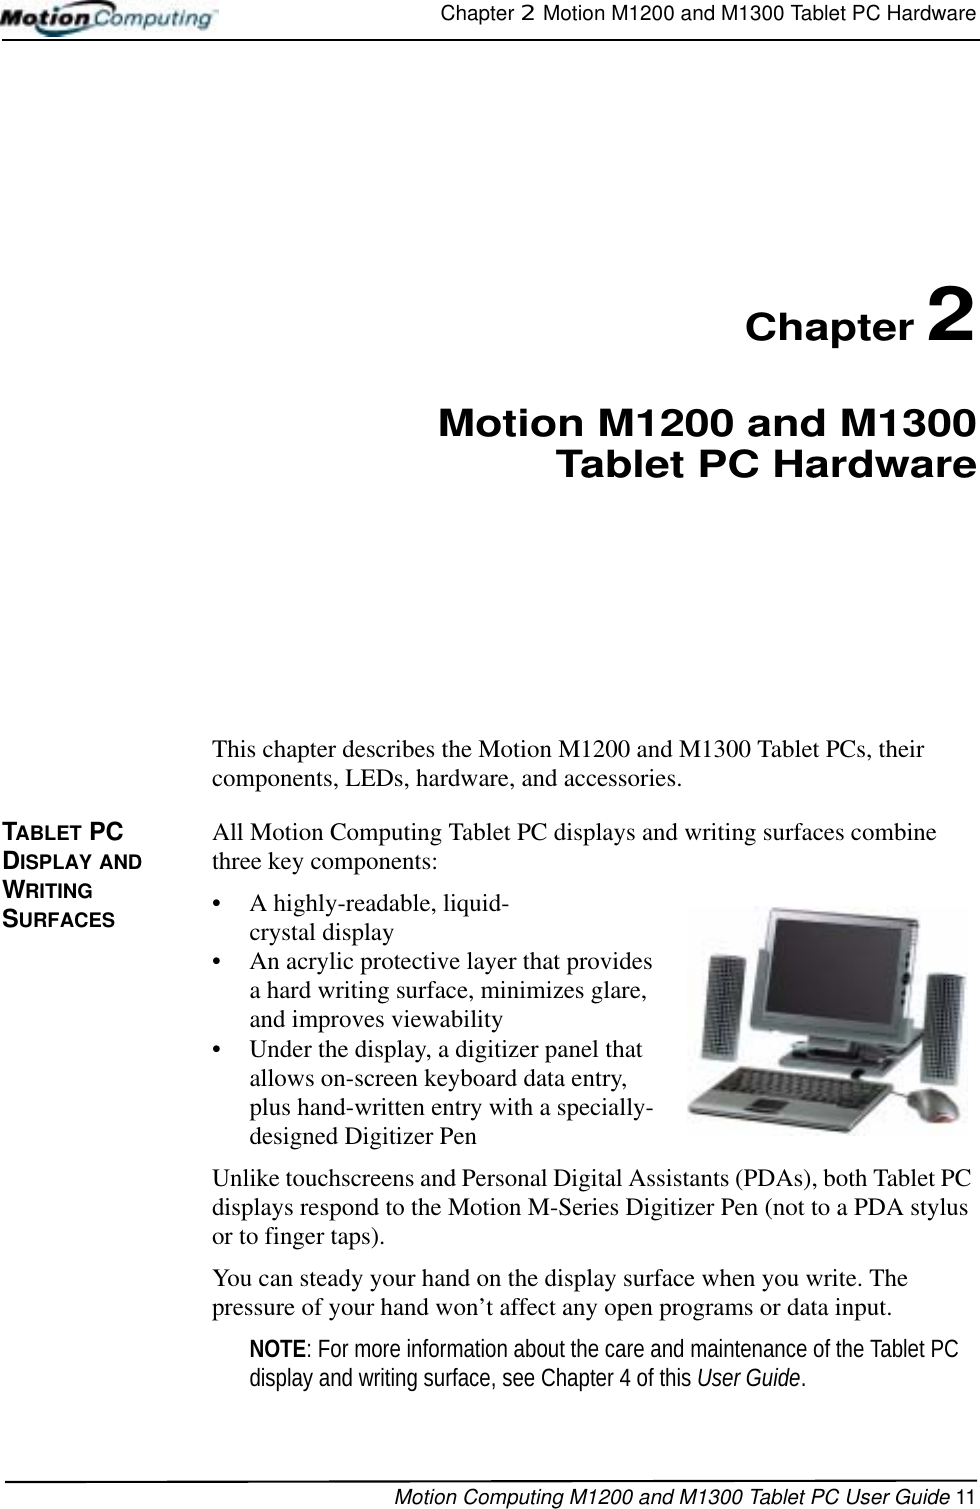 Chapter 2  Motion M1200 and M1300 Tablet PC HardwareMotion Computing M1200 and M1300 Tablet PC User Guide 11Chapter 2Motion M1200 and M1300Tablet PC HardwareThis chapter describes the Motion M1200 and M1300 Tablet PCs, their components, LEDs, hardware, and accessories.TABLET PC DISPLAY AND WRITING SURFACESAll Motion Computing Tablet PC displays and writing surfaces combine three key components: • A highly-readable, liquid-crystal display • An acrylic protective layer that provides a hard writing surface, minimizes glare, and improves viewability• Under the display, a digitizer panel that allows on-screen keyboard data entry, plus hand-written entry with a specially-designed Digitizer PenUnlike touchscreens and Personal Digital Assistants (PDAs), both Tablet PC displays respond to the Motion M-Series Digitizer Pen (not to a PDA stylus or to finger taps). You can steady your hand on the display surface when you write. The pressure of your hand won’t affect any open programs or data input. NOTE: For more information about the care and maintenance of the Tablet PC display and writing surface, see Chapter 4 of this User Guide.